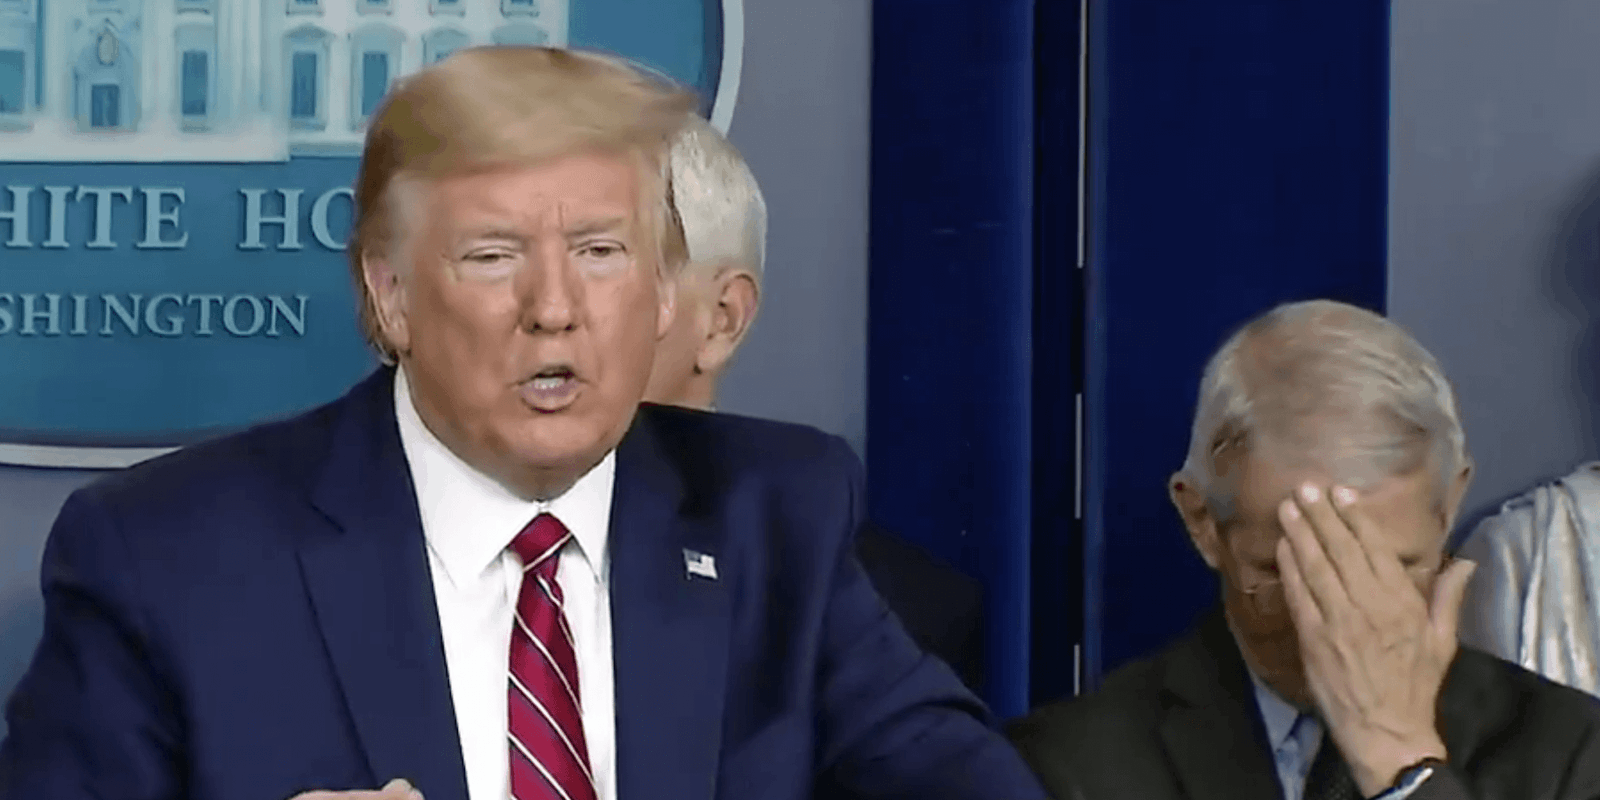 President Donald Trump and Dr. Anthony Fauci at a White House press briefing